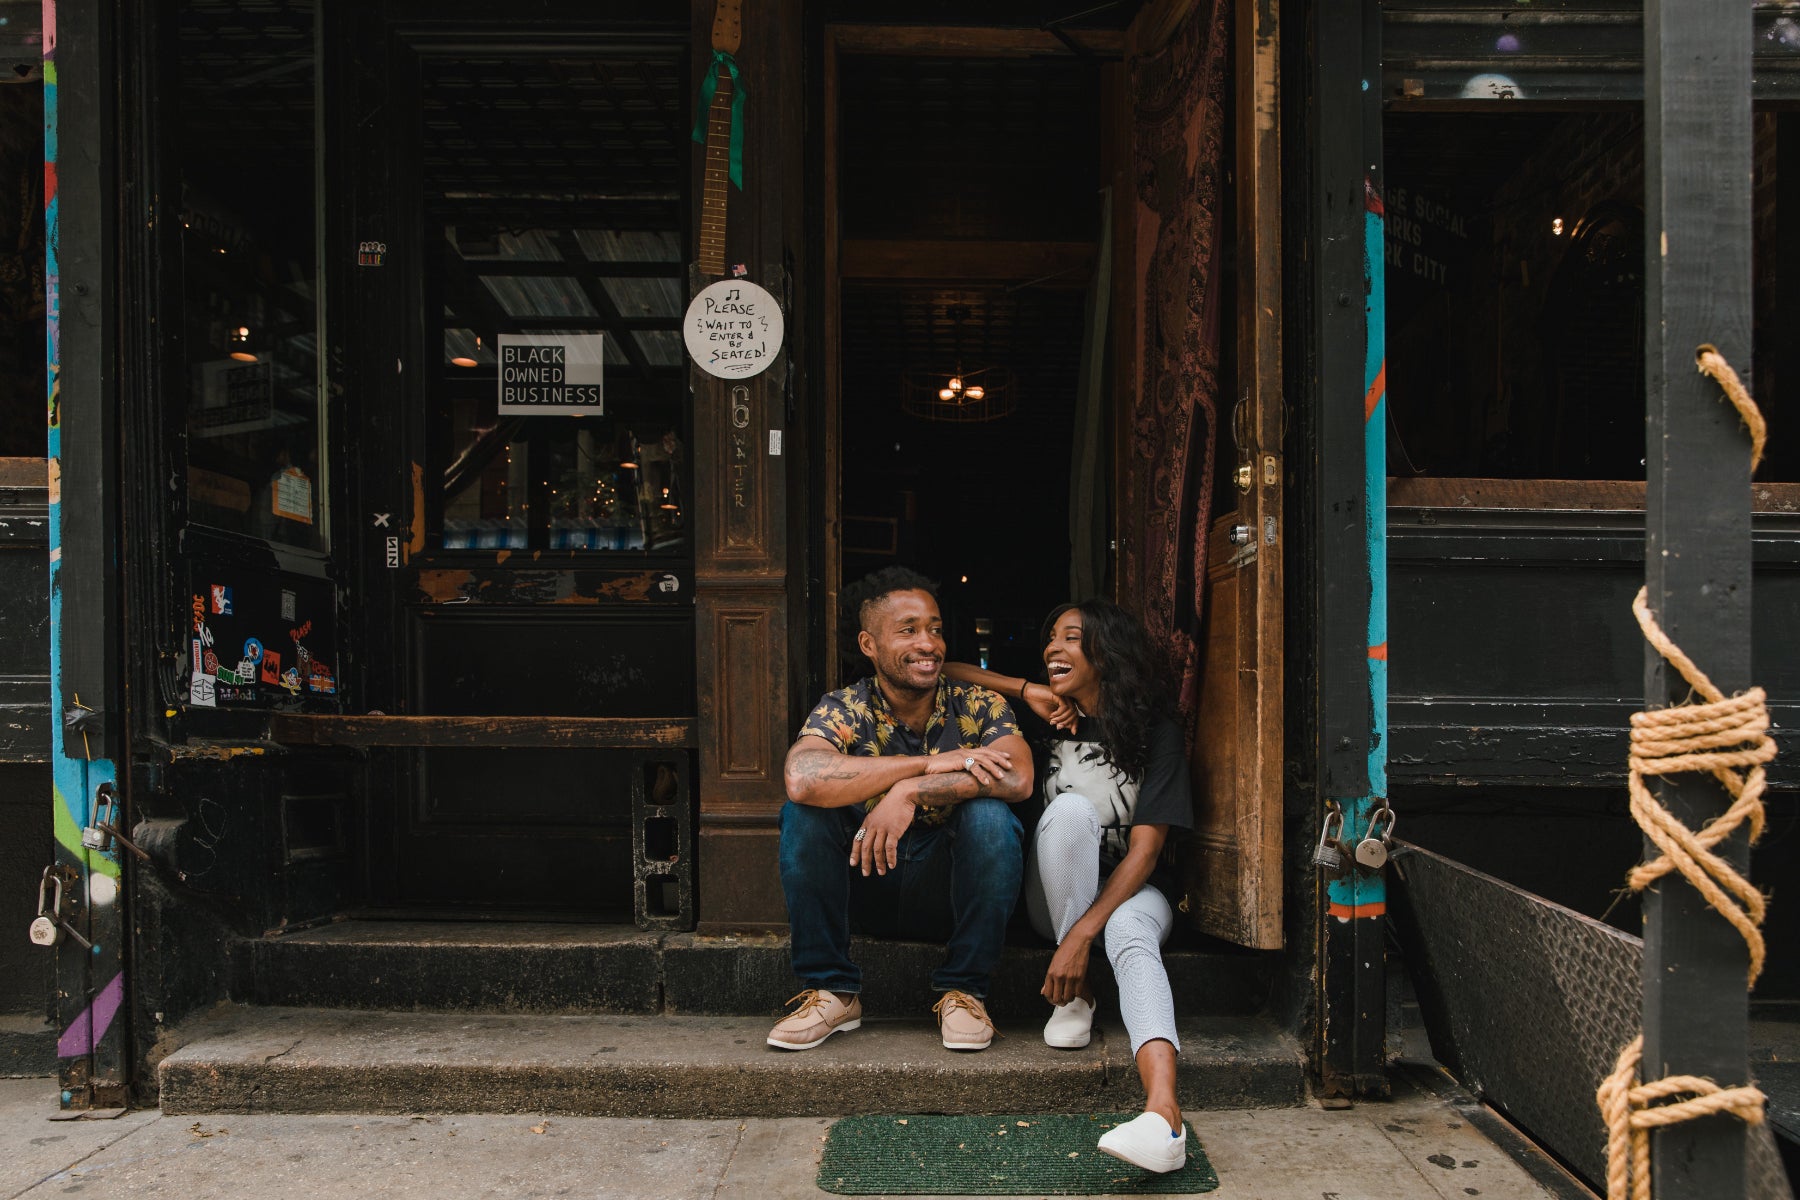 A couple sits on the stoop in front of a small retail business